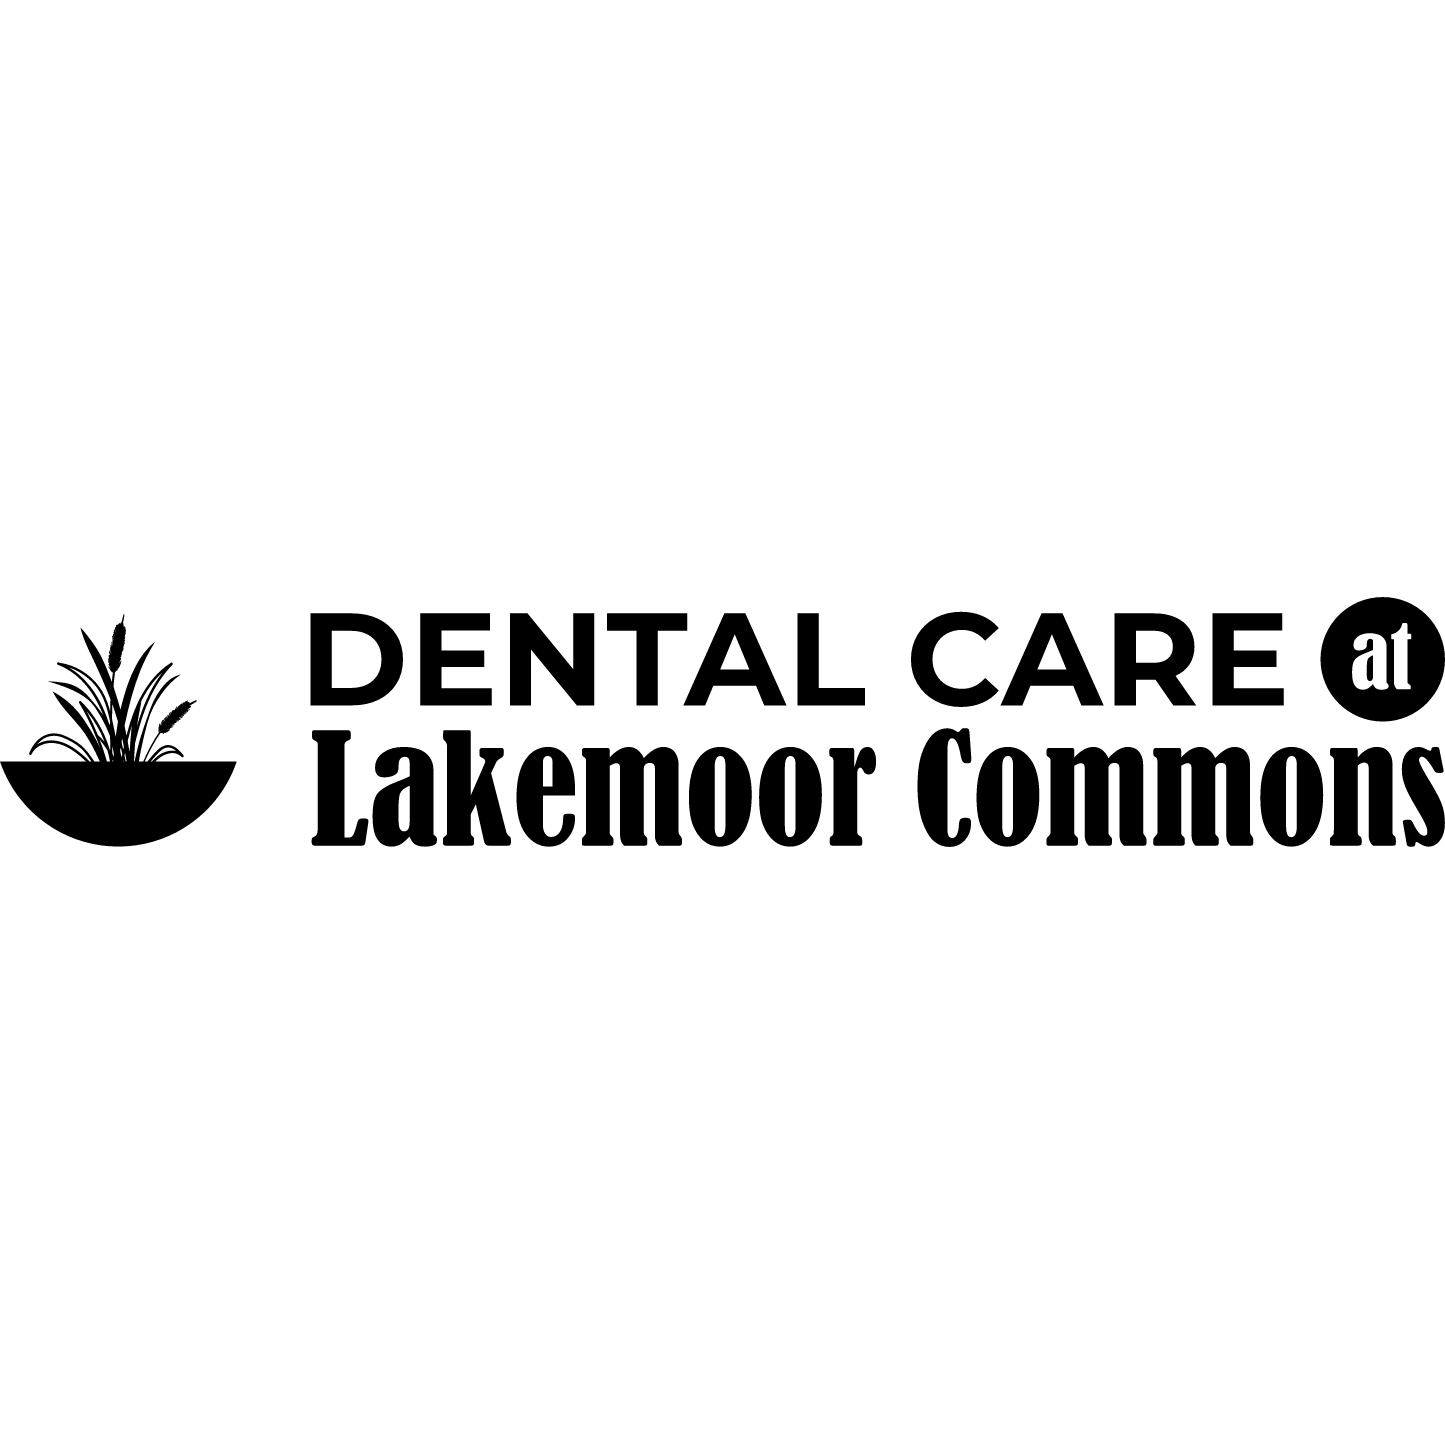 Dental Care at Lakemoor Commons